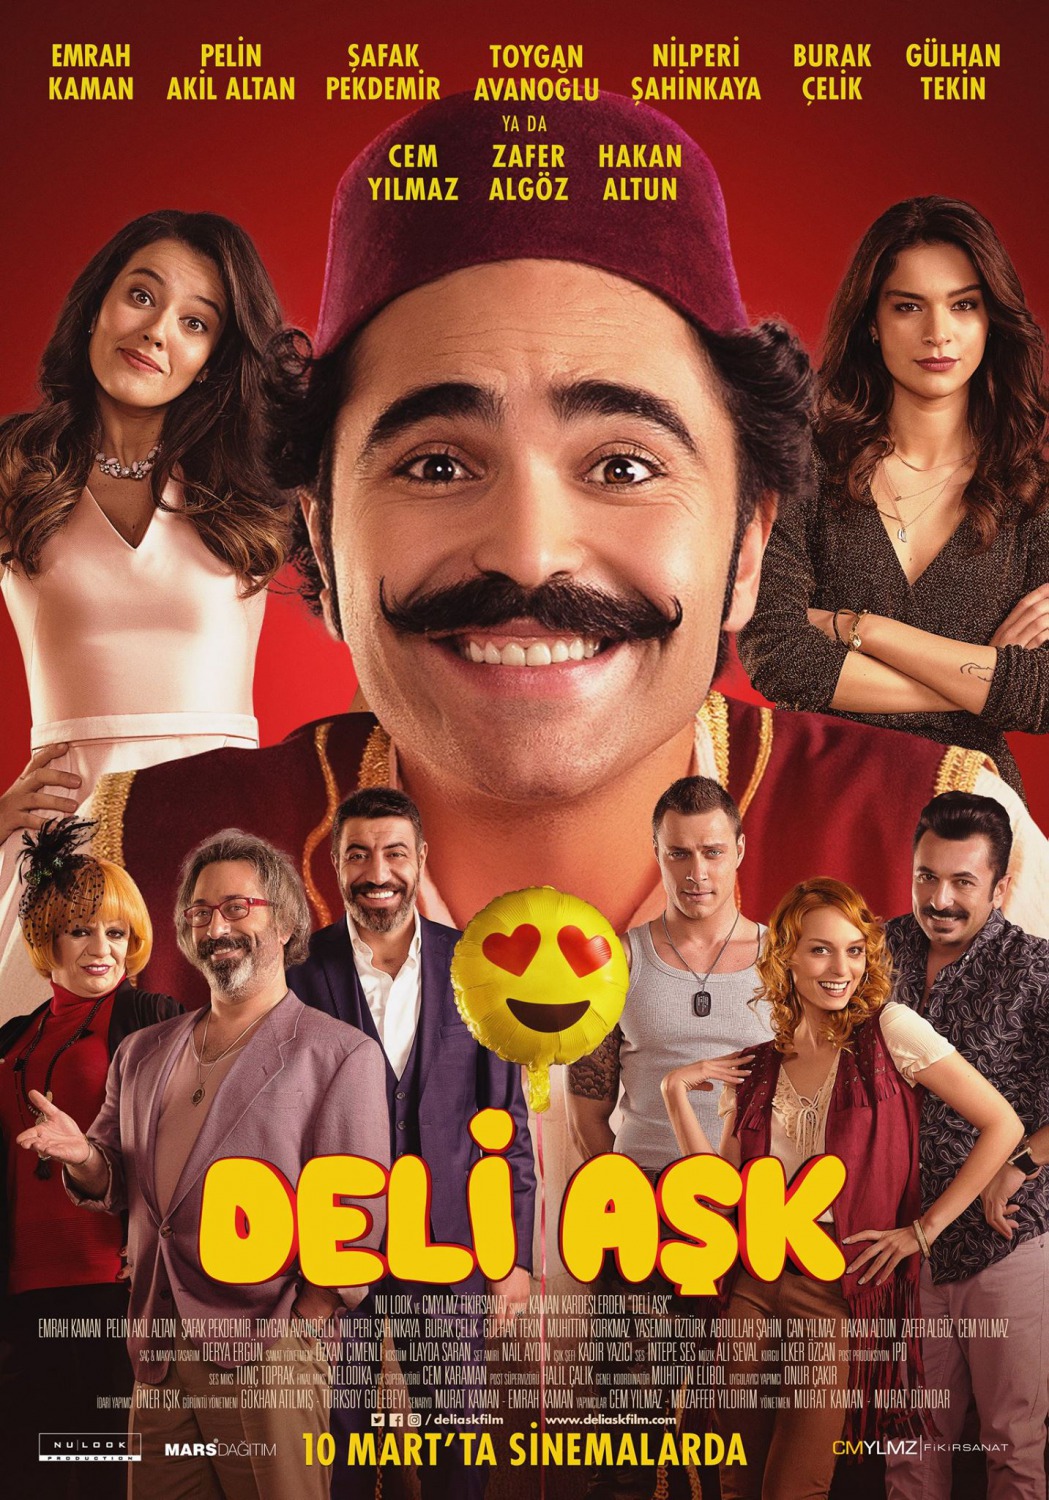 Extra Large Movie Poster Image for Deli Ask (#8 of 8)